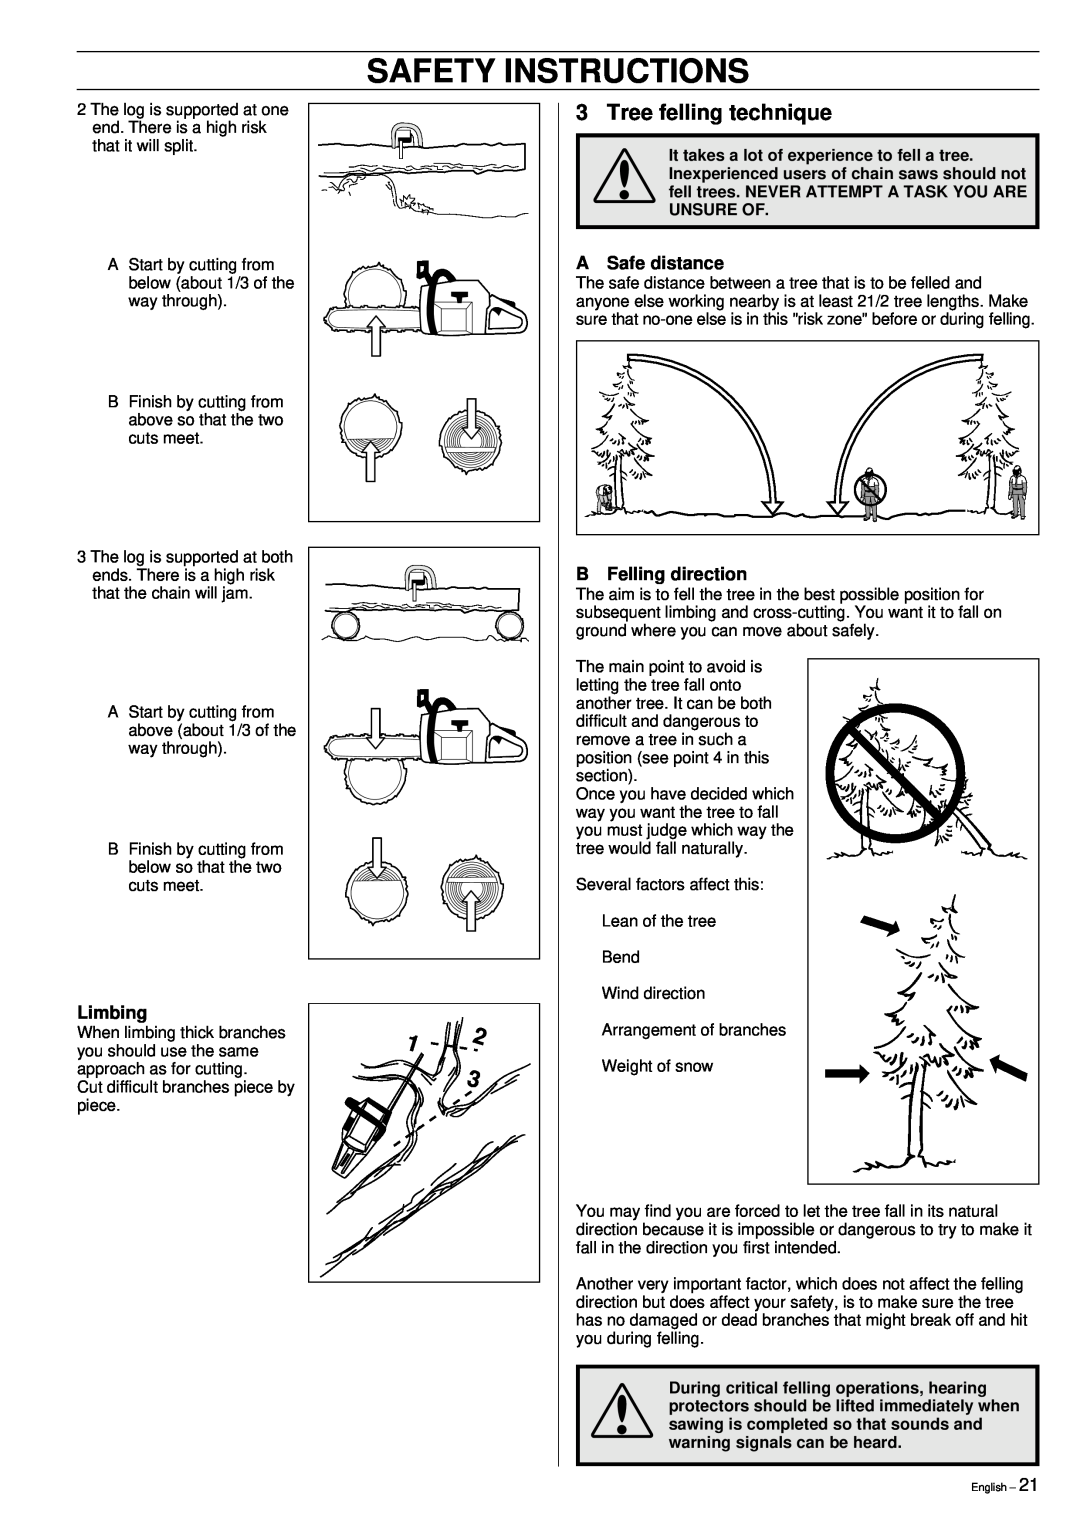 Husqvarna 51 manual Safety Instructions, Tree felling technique, A Safe distance, Limbing, B Felling direction 